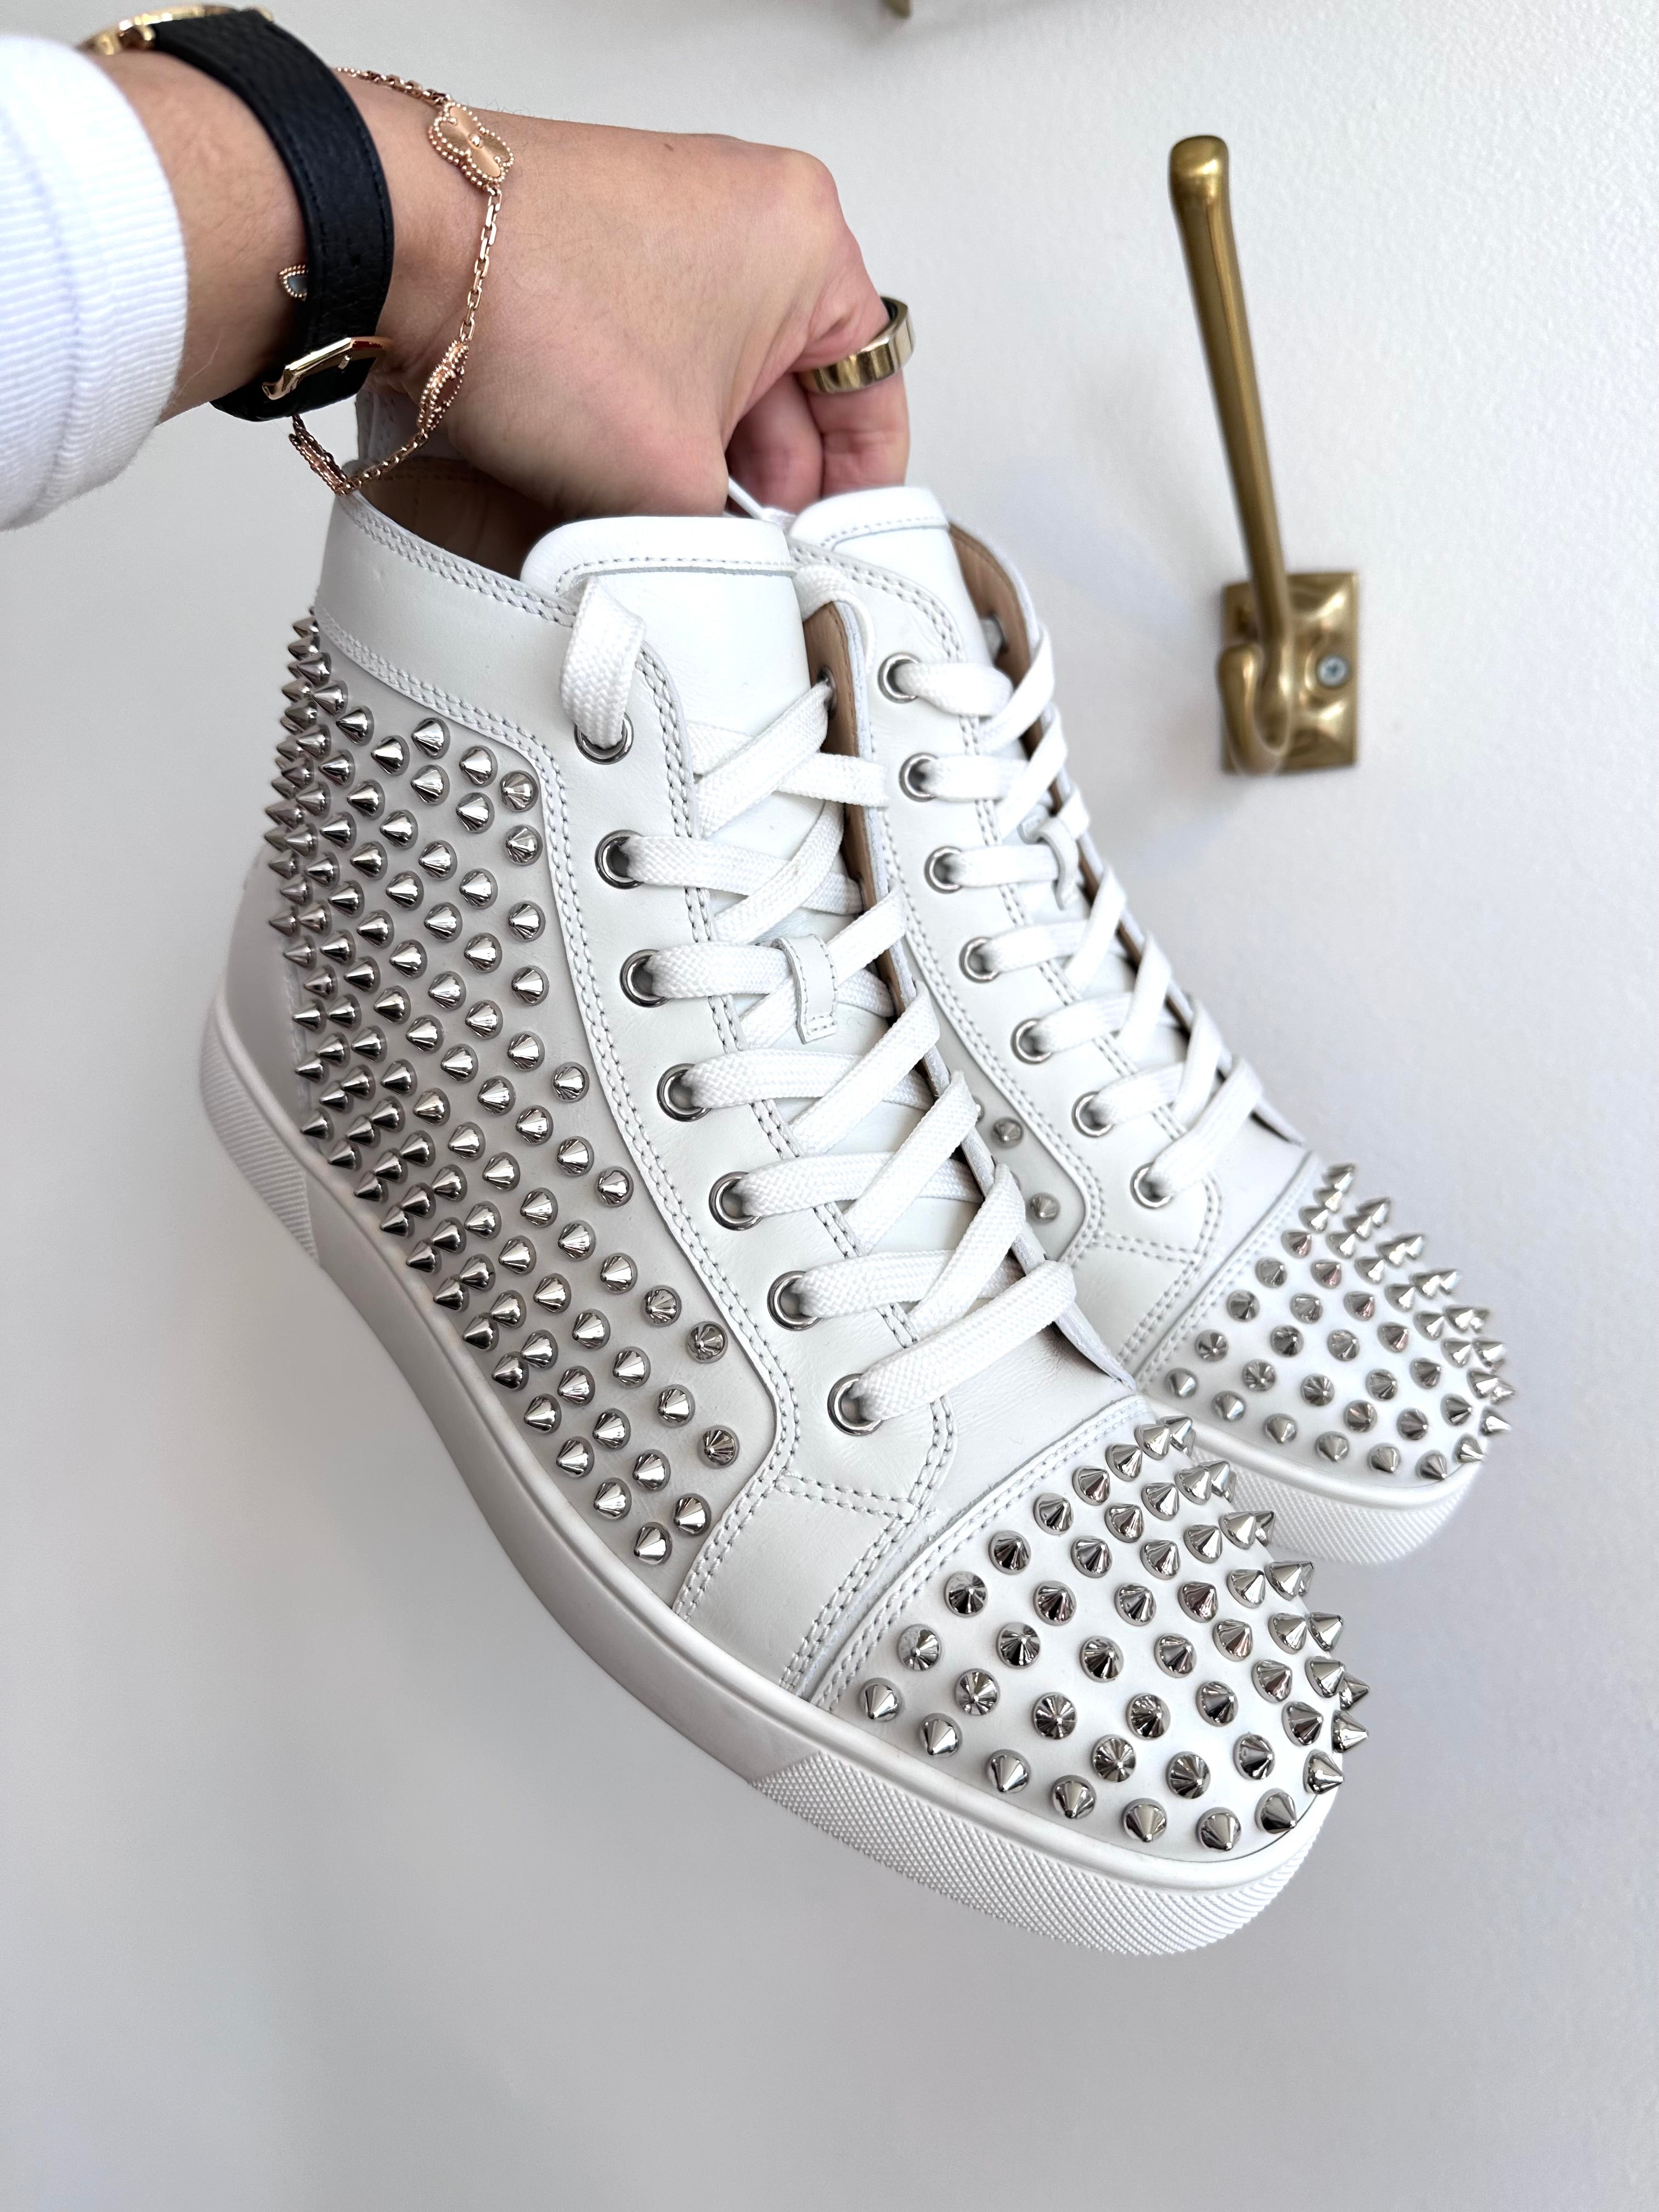 Pre-Owned CHRISTIAN LOUBOUTIN Louis Flat Calf Spikes High Top Sneaker White Size 41